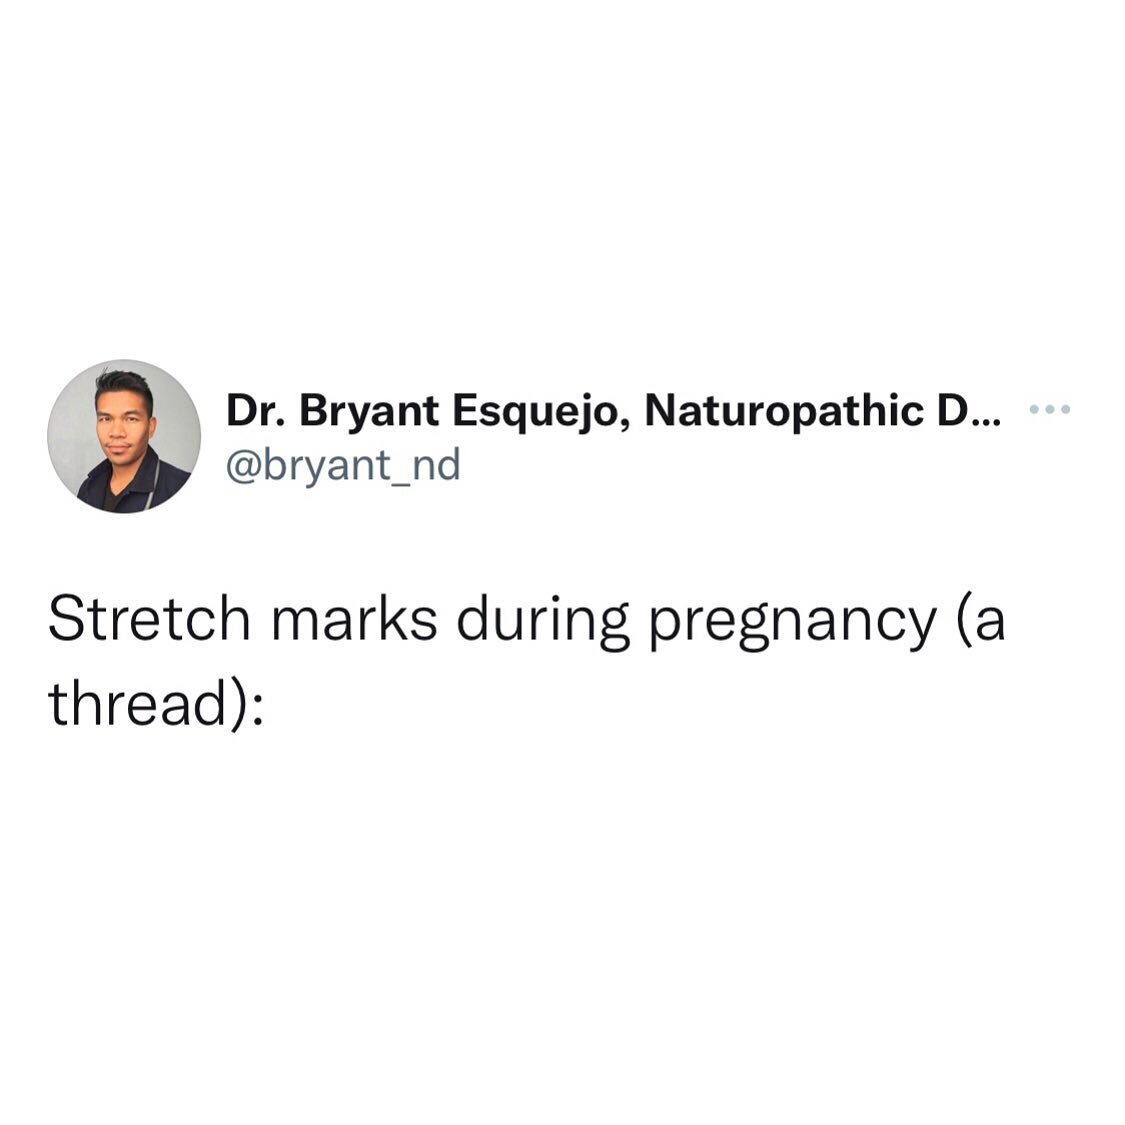 🔗Tap the link in my bio to learn more about stretch marks during pregnancy!

➡️And, check out @gracefullbirth for information on prenatal/postnatal/lactation health!🤰
#livenaturopathically #NDhealth #pregnancyskincare